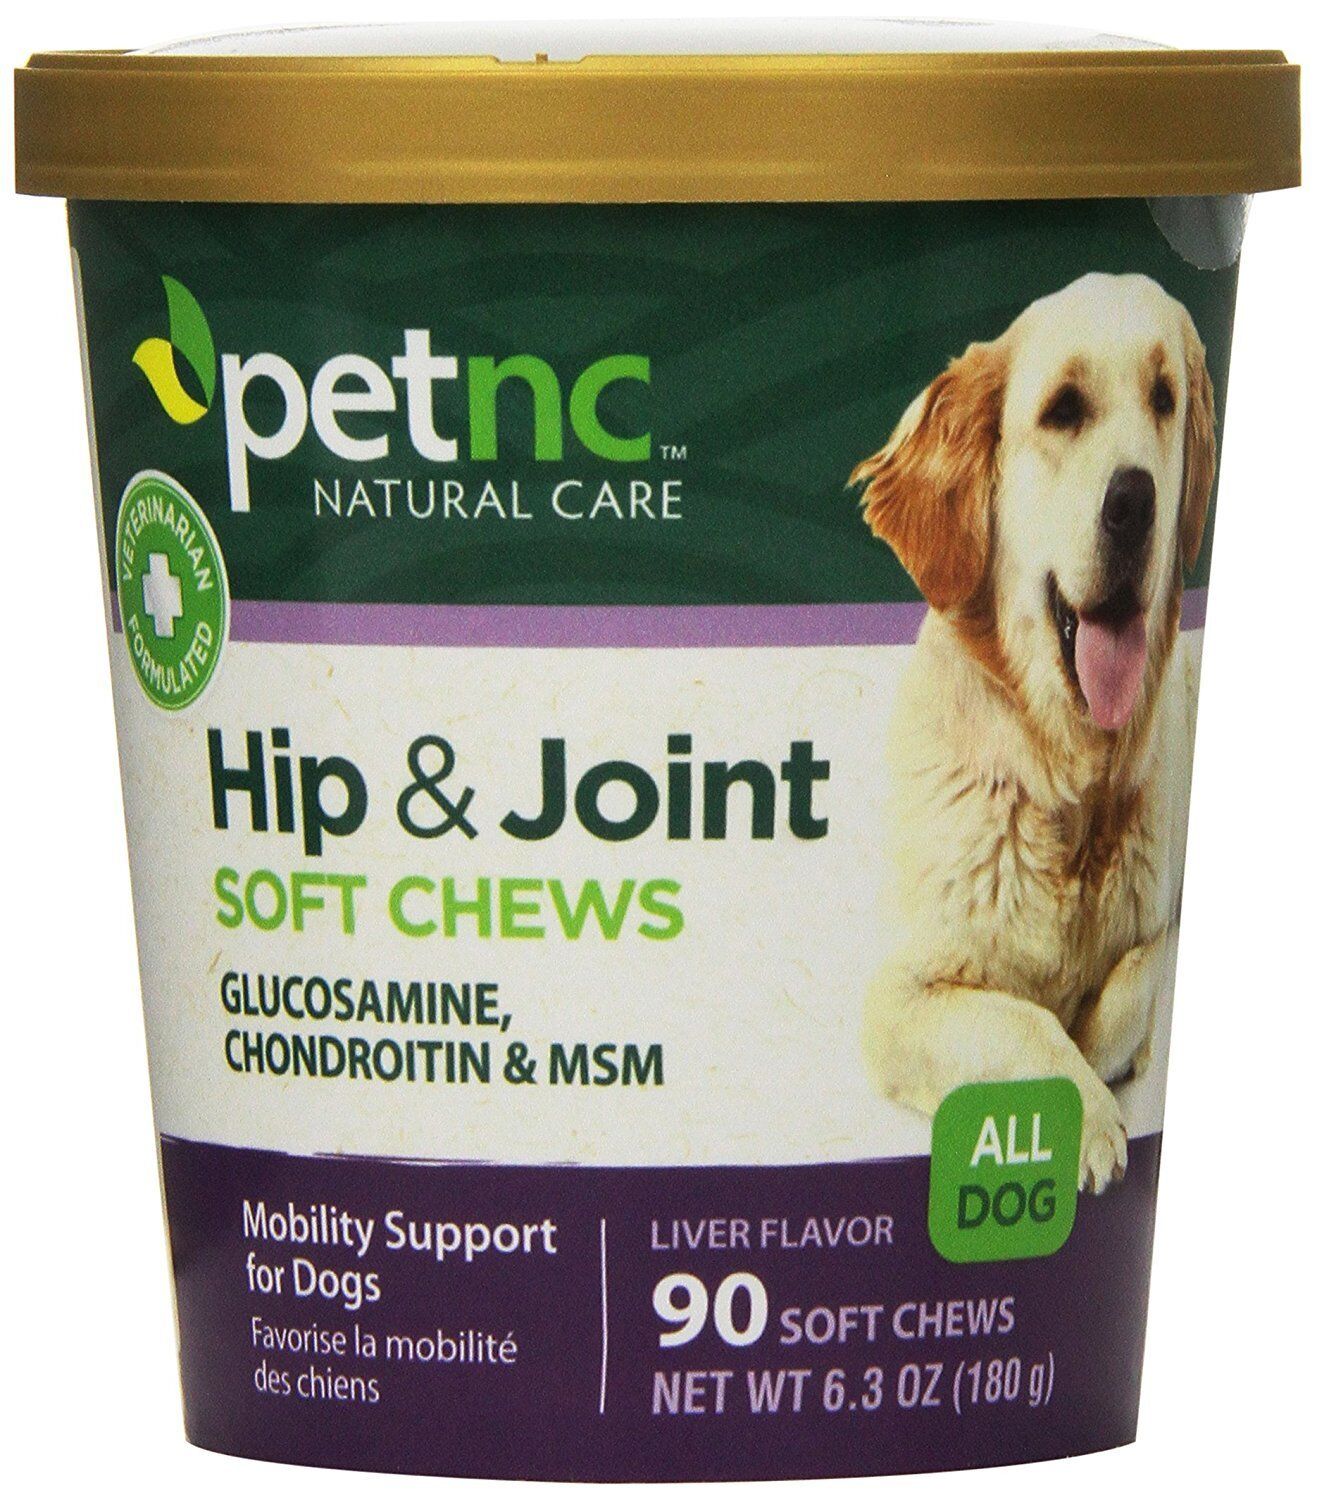 PetNC Natural Care Hip & Joint Soft Chews Liver Flavor Mobility Support 90 Count